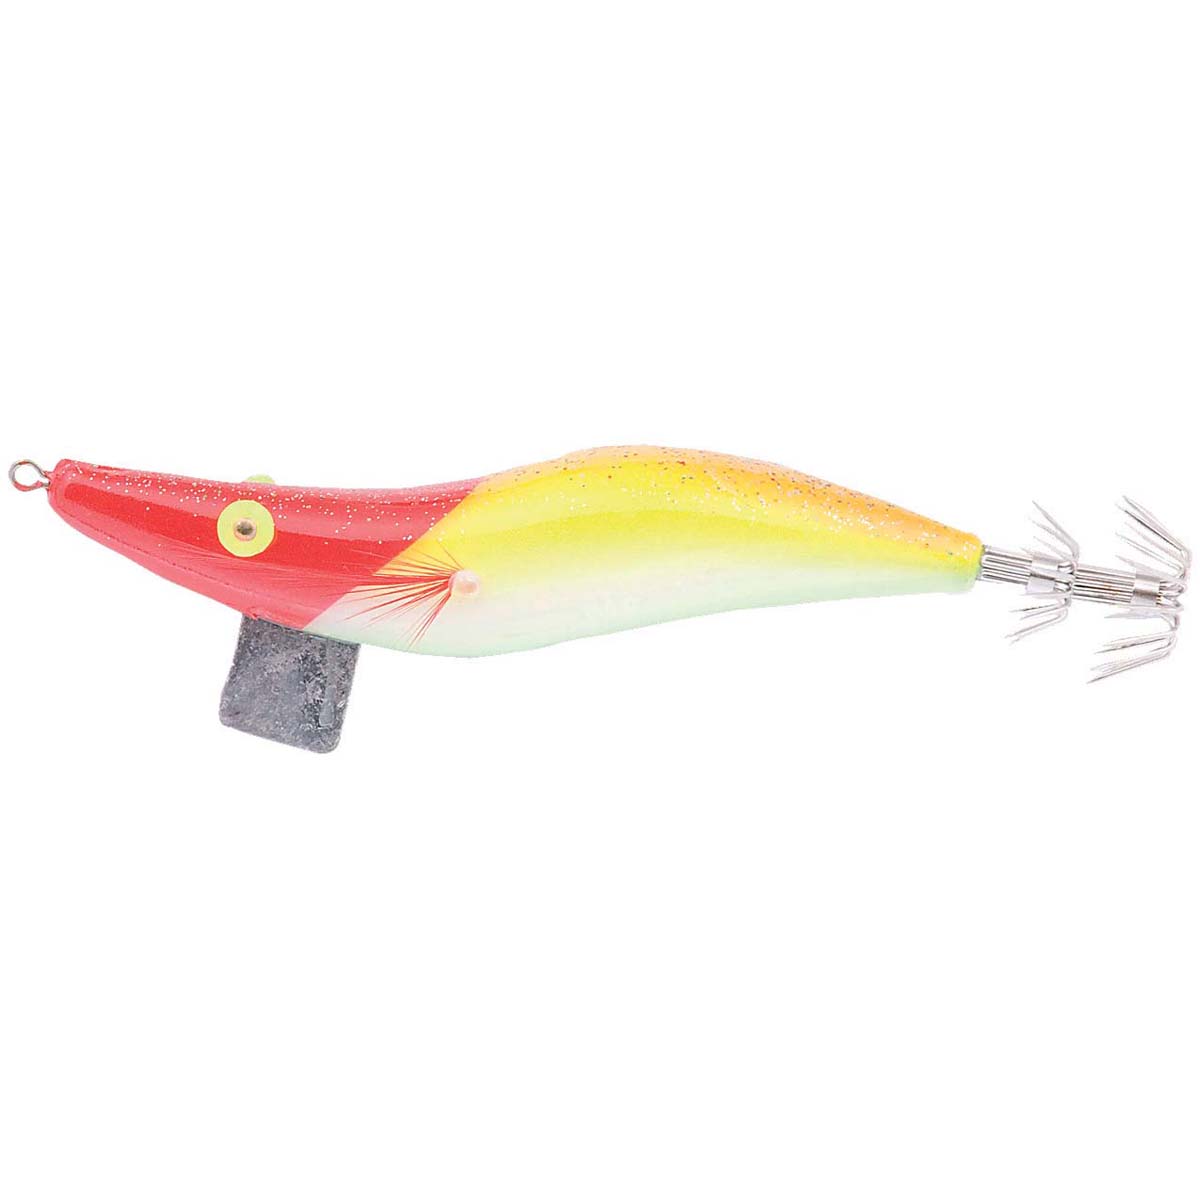 Neptune Smoothie Squid Jig Lure 3.5 Yellow Red